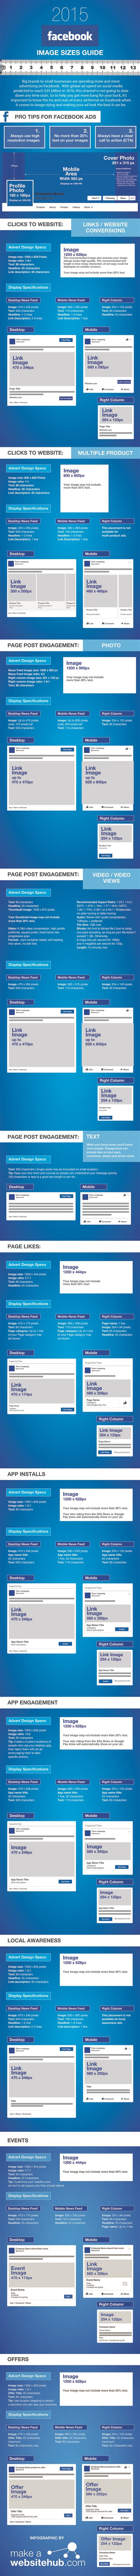 The Ultimate Cheat Sheet For Facebook Image Sizes Infographic Reverasite